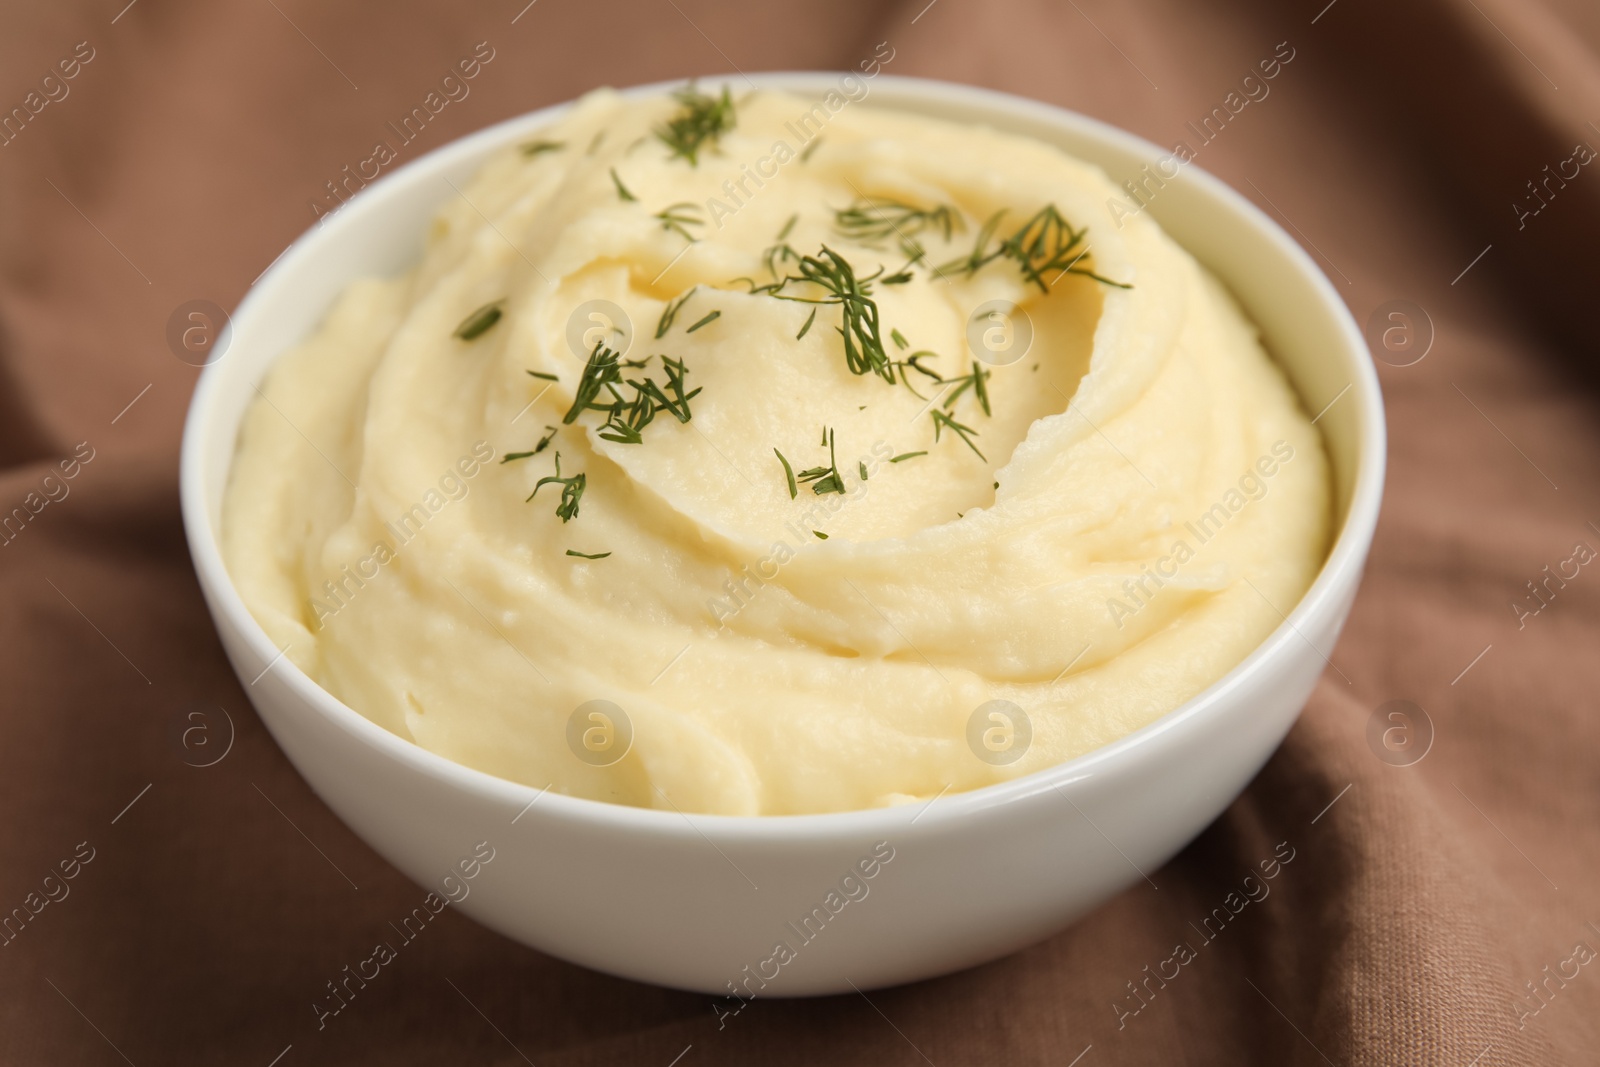 Photo of Freshly cooked homemade mashed potatoes on brown fabric